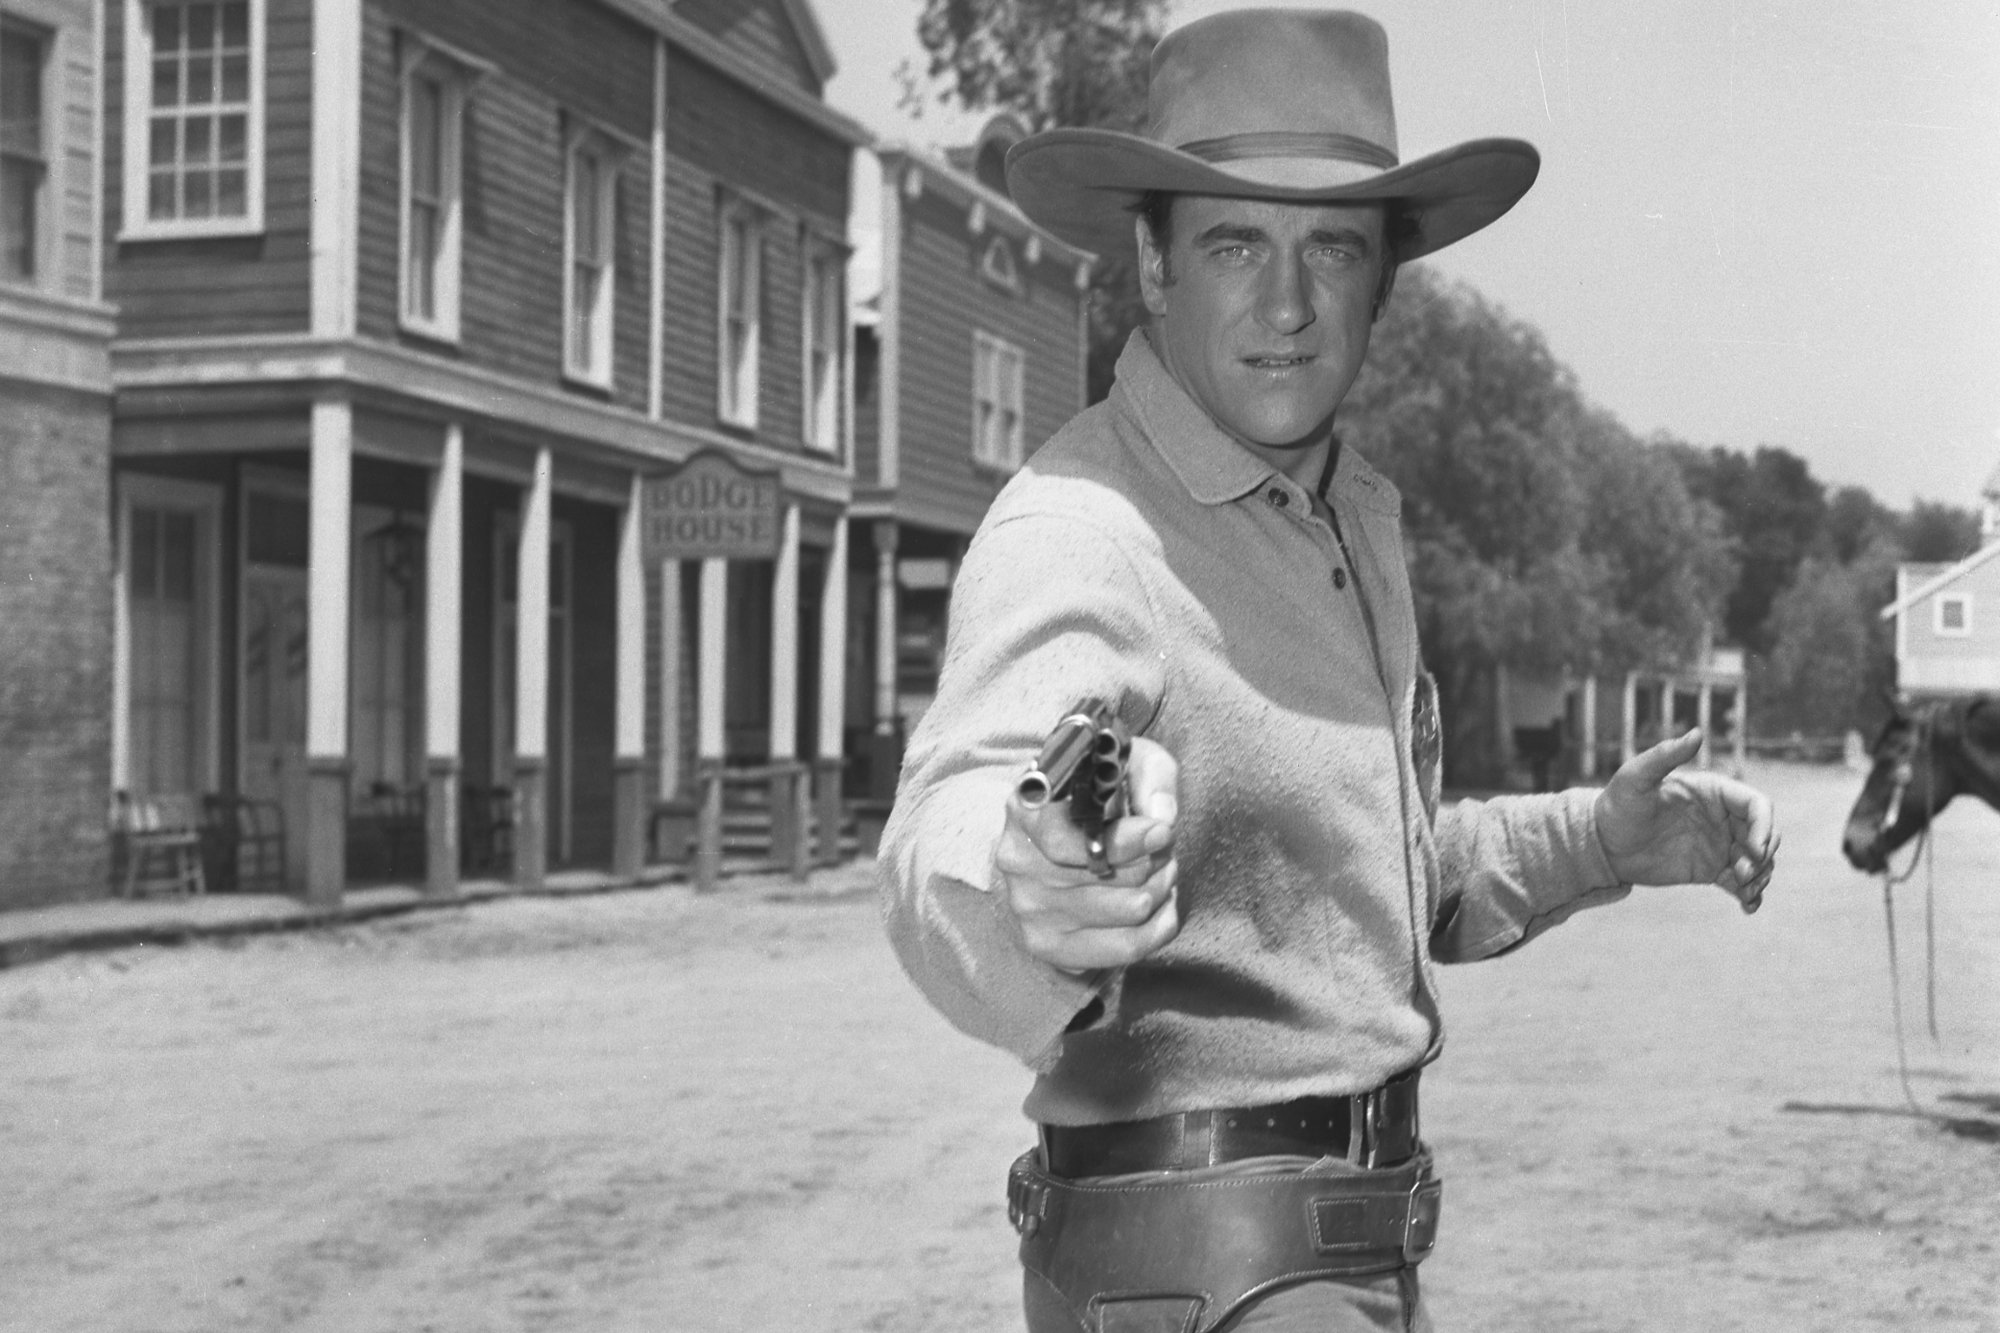 'Gunsmoke' actor James Arness as Matt Dillon in a black-and-white picture on a dirt road, wearing Western clothes, and holding a gun out at the camera